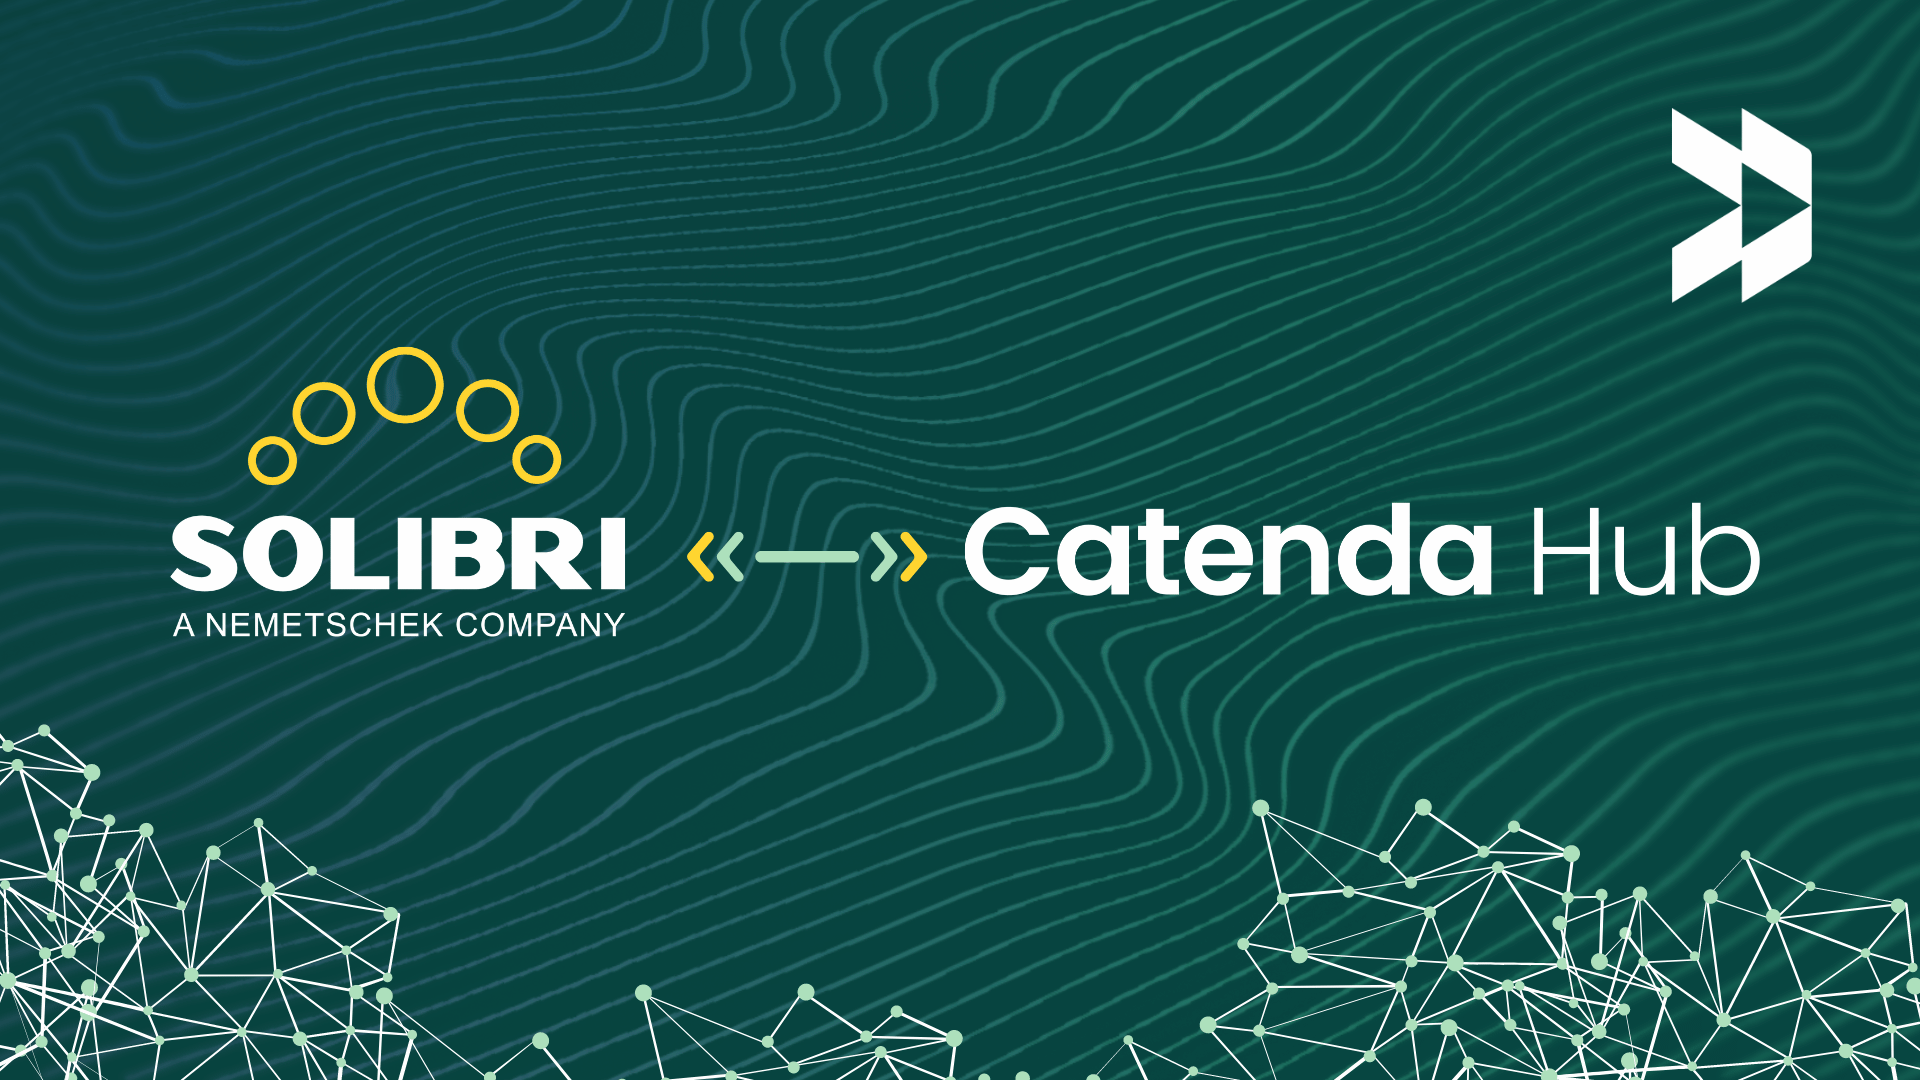 Solibri, a nemetschek company, and Catenda Hub bcf connection, discover how to set the connection between Solibri and Catenda Hub